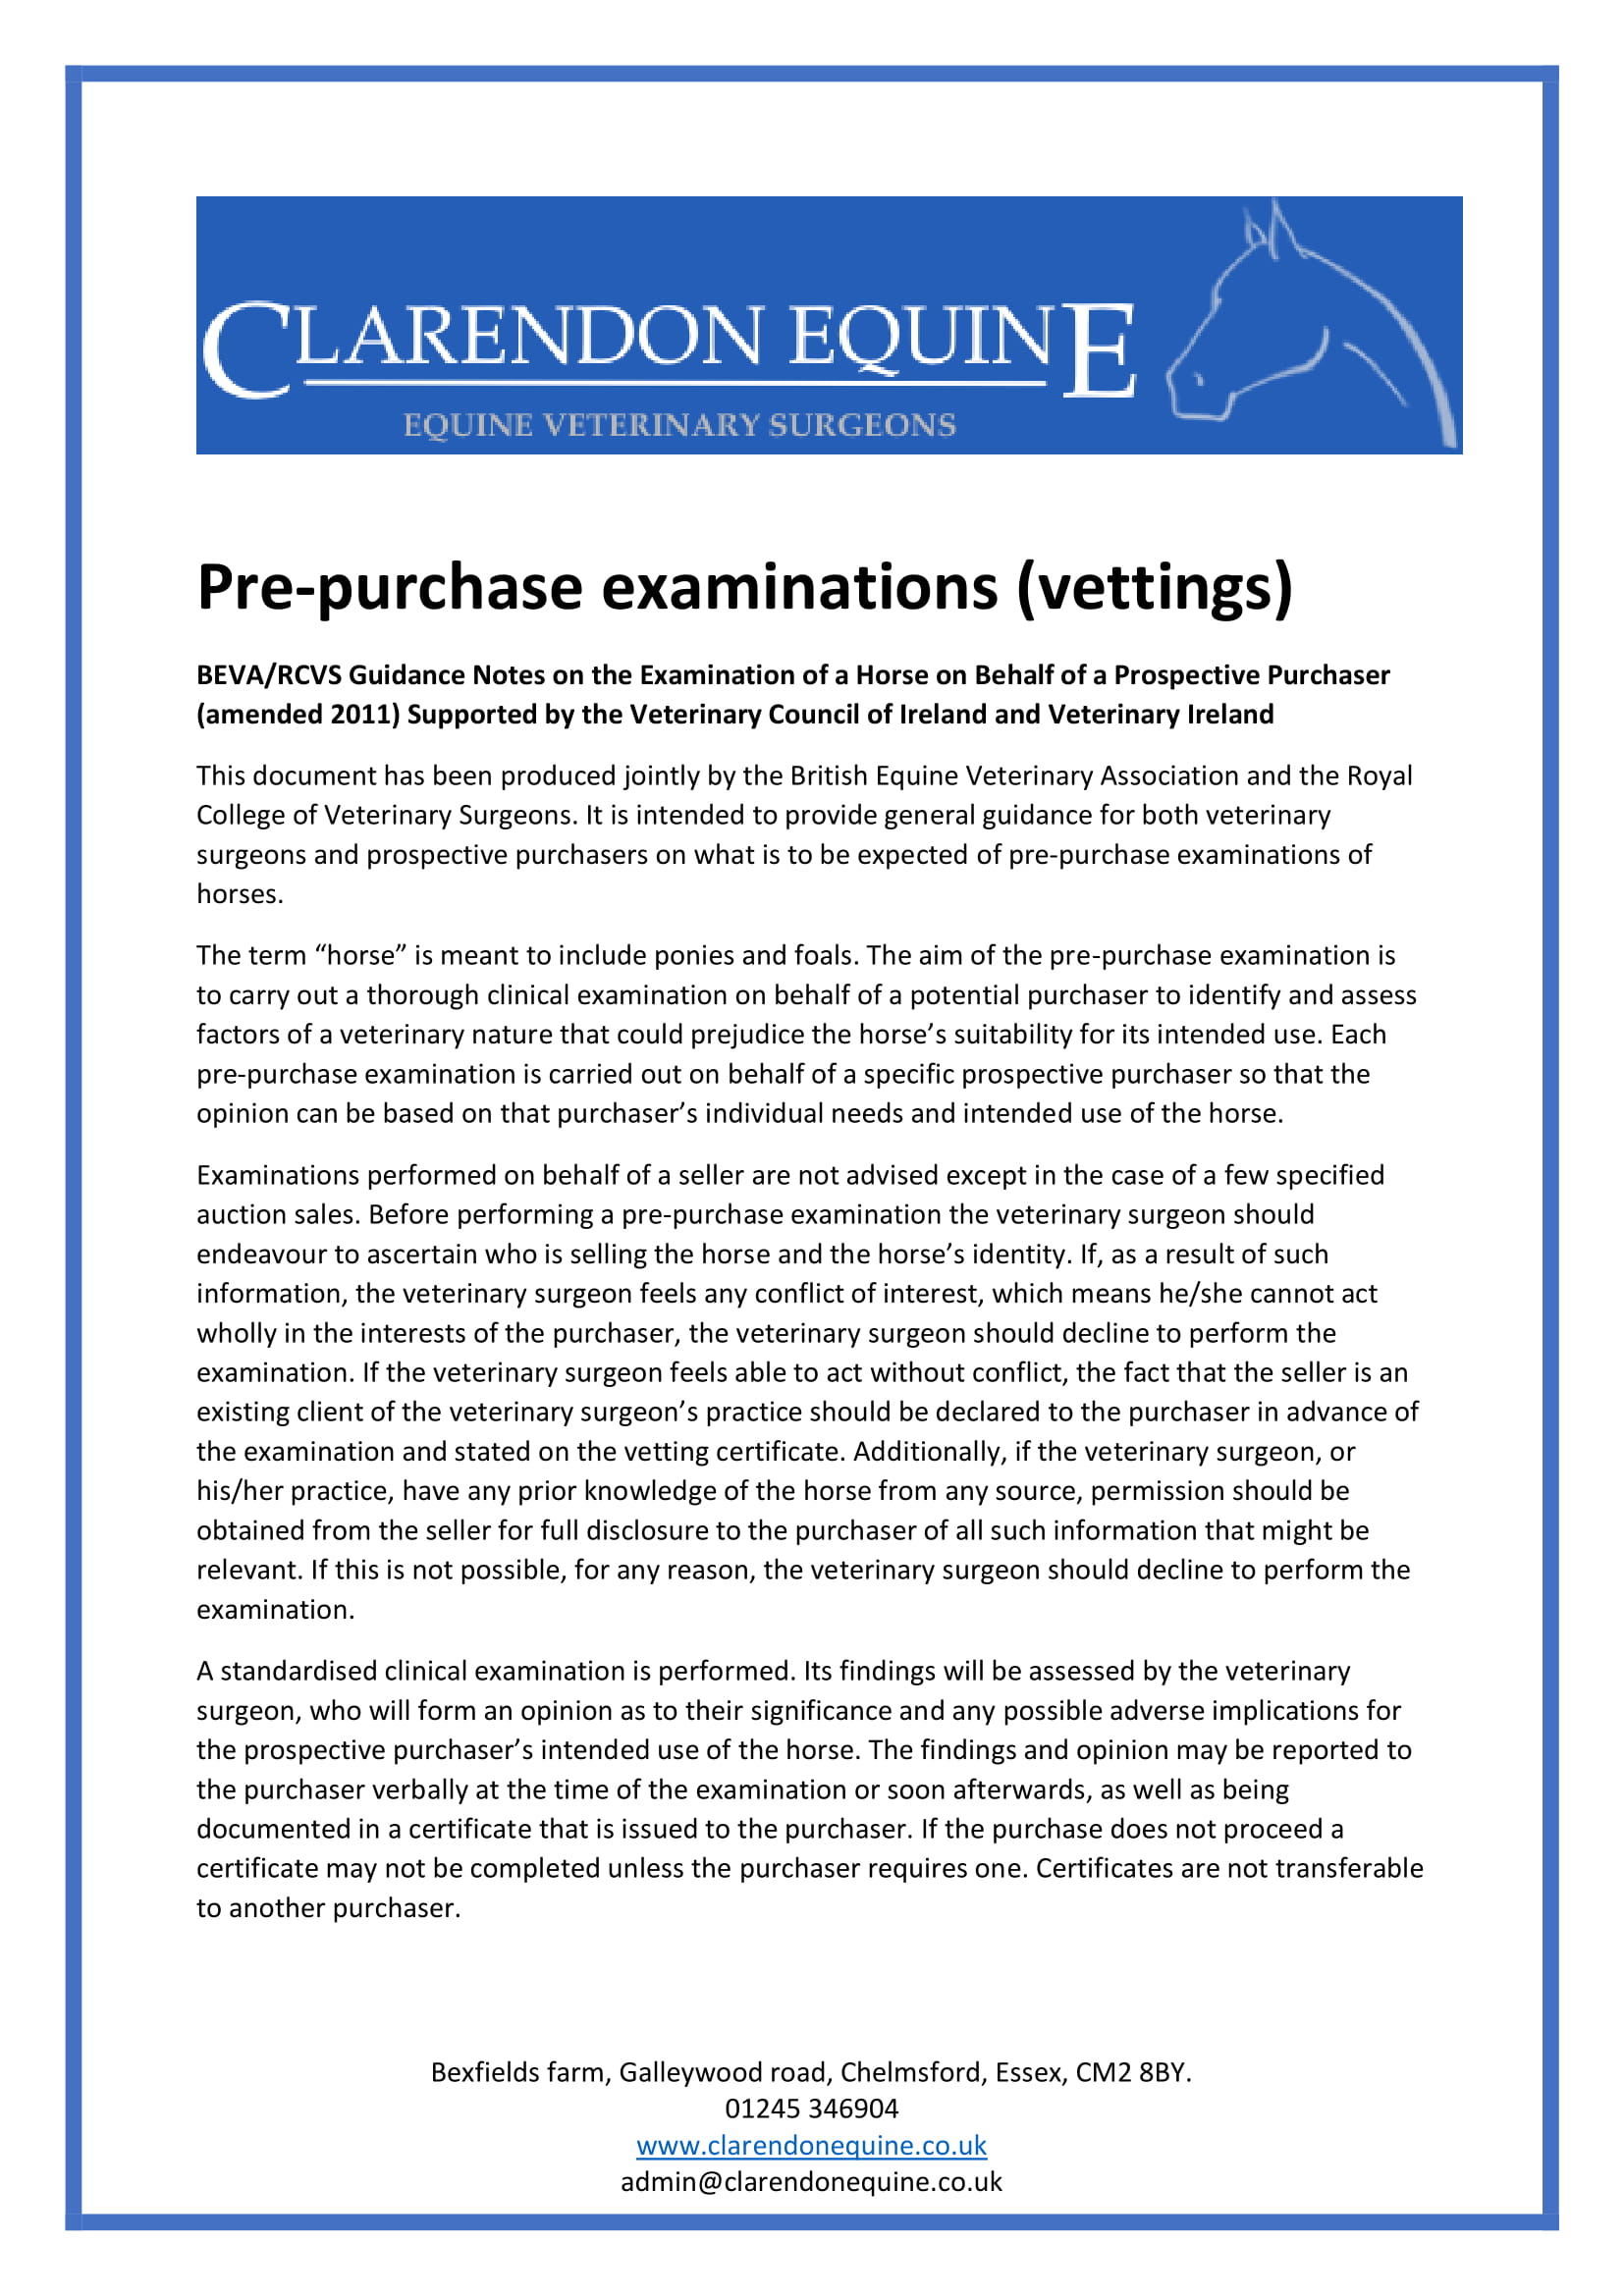 Pre-purchase examinations (vettings)